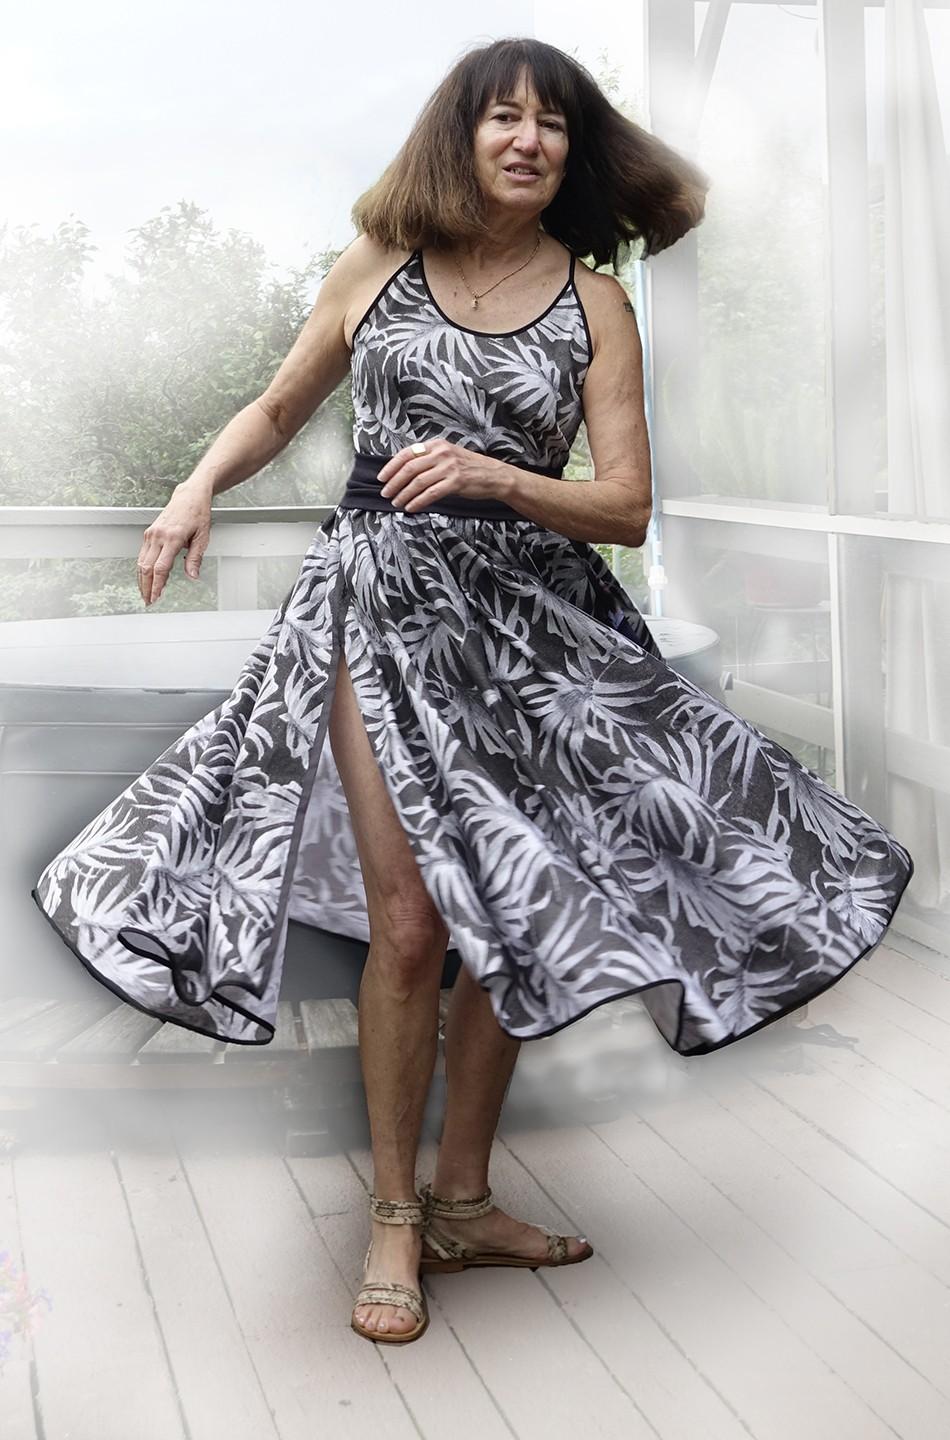 Robin Botie of Ithaca, New York, has a photo printed on fabric and sews it into a dress.